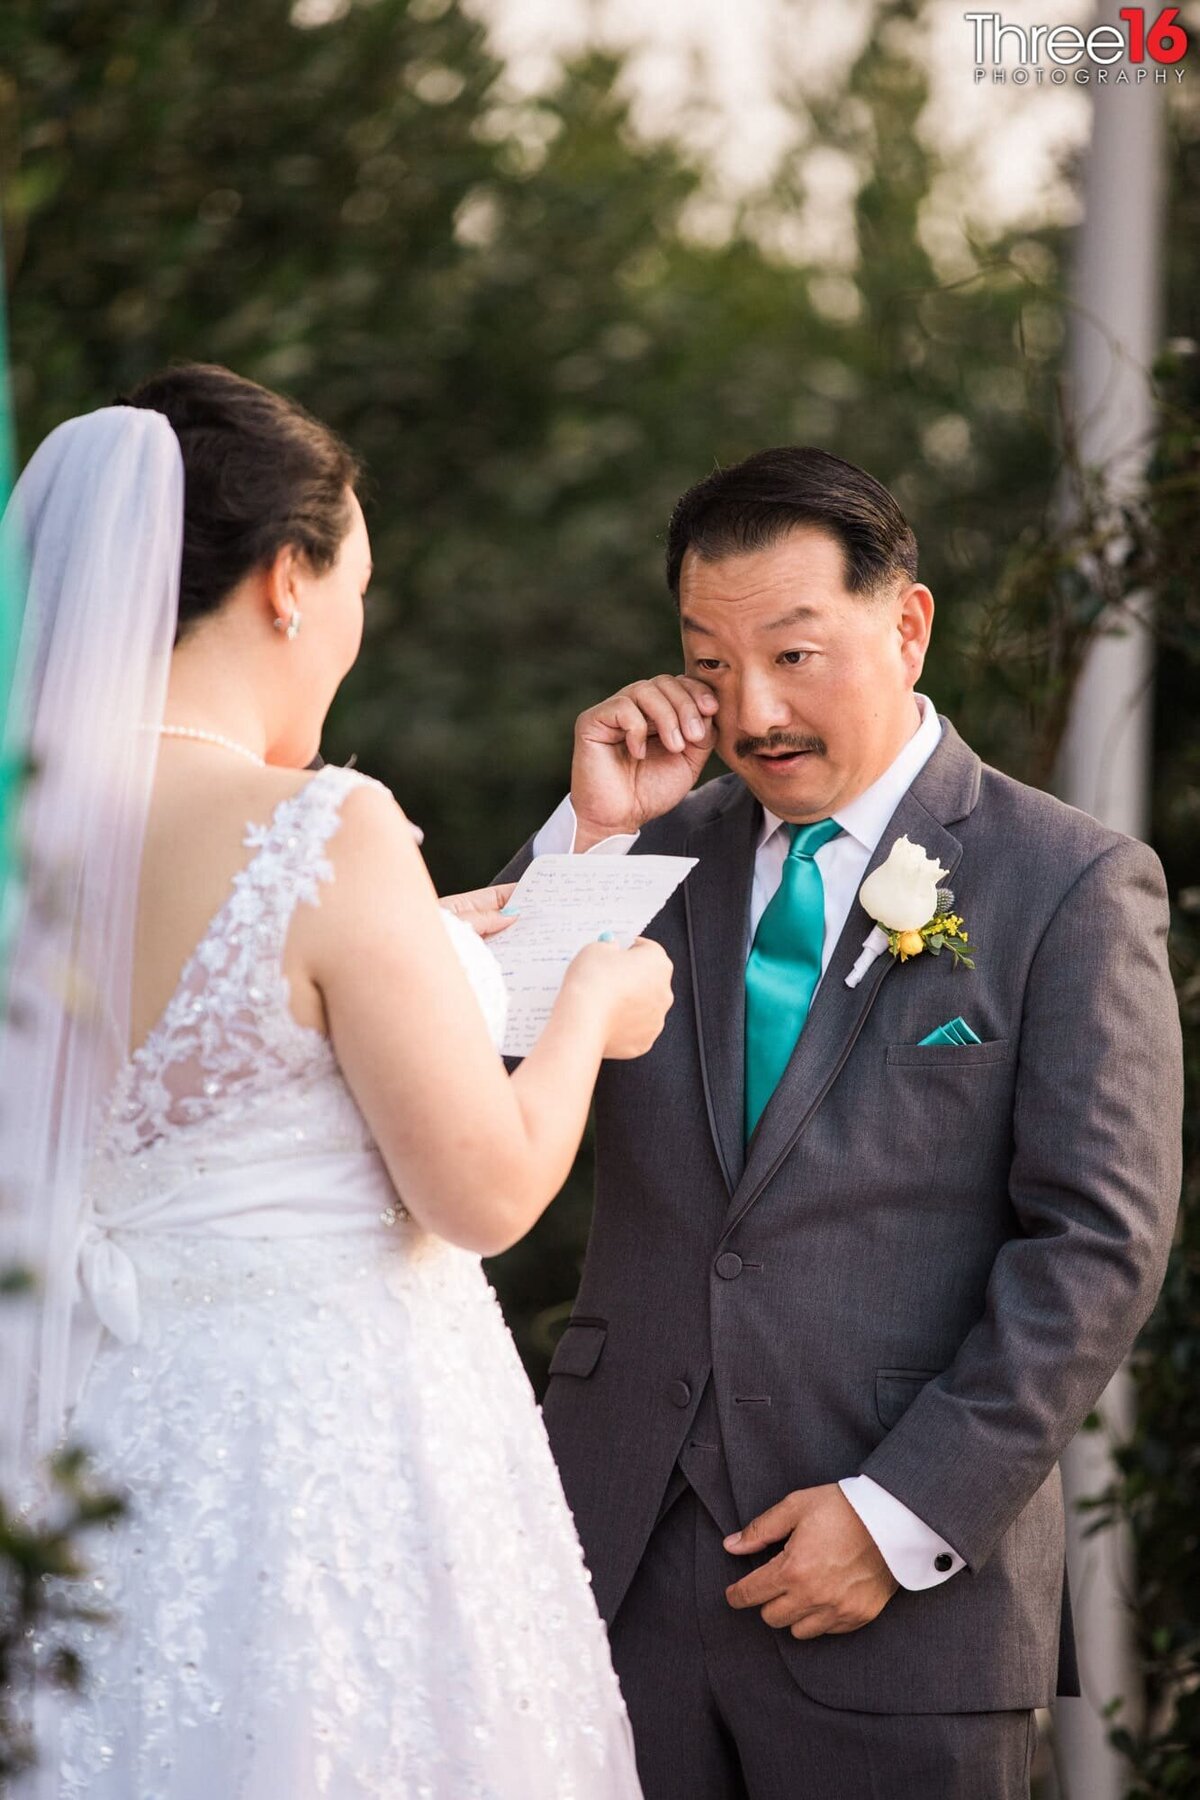 Groom sheds a tear as his Bride reads her vows to him